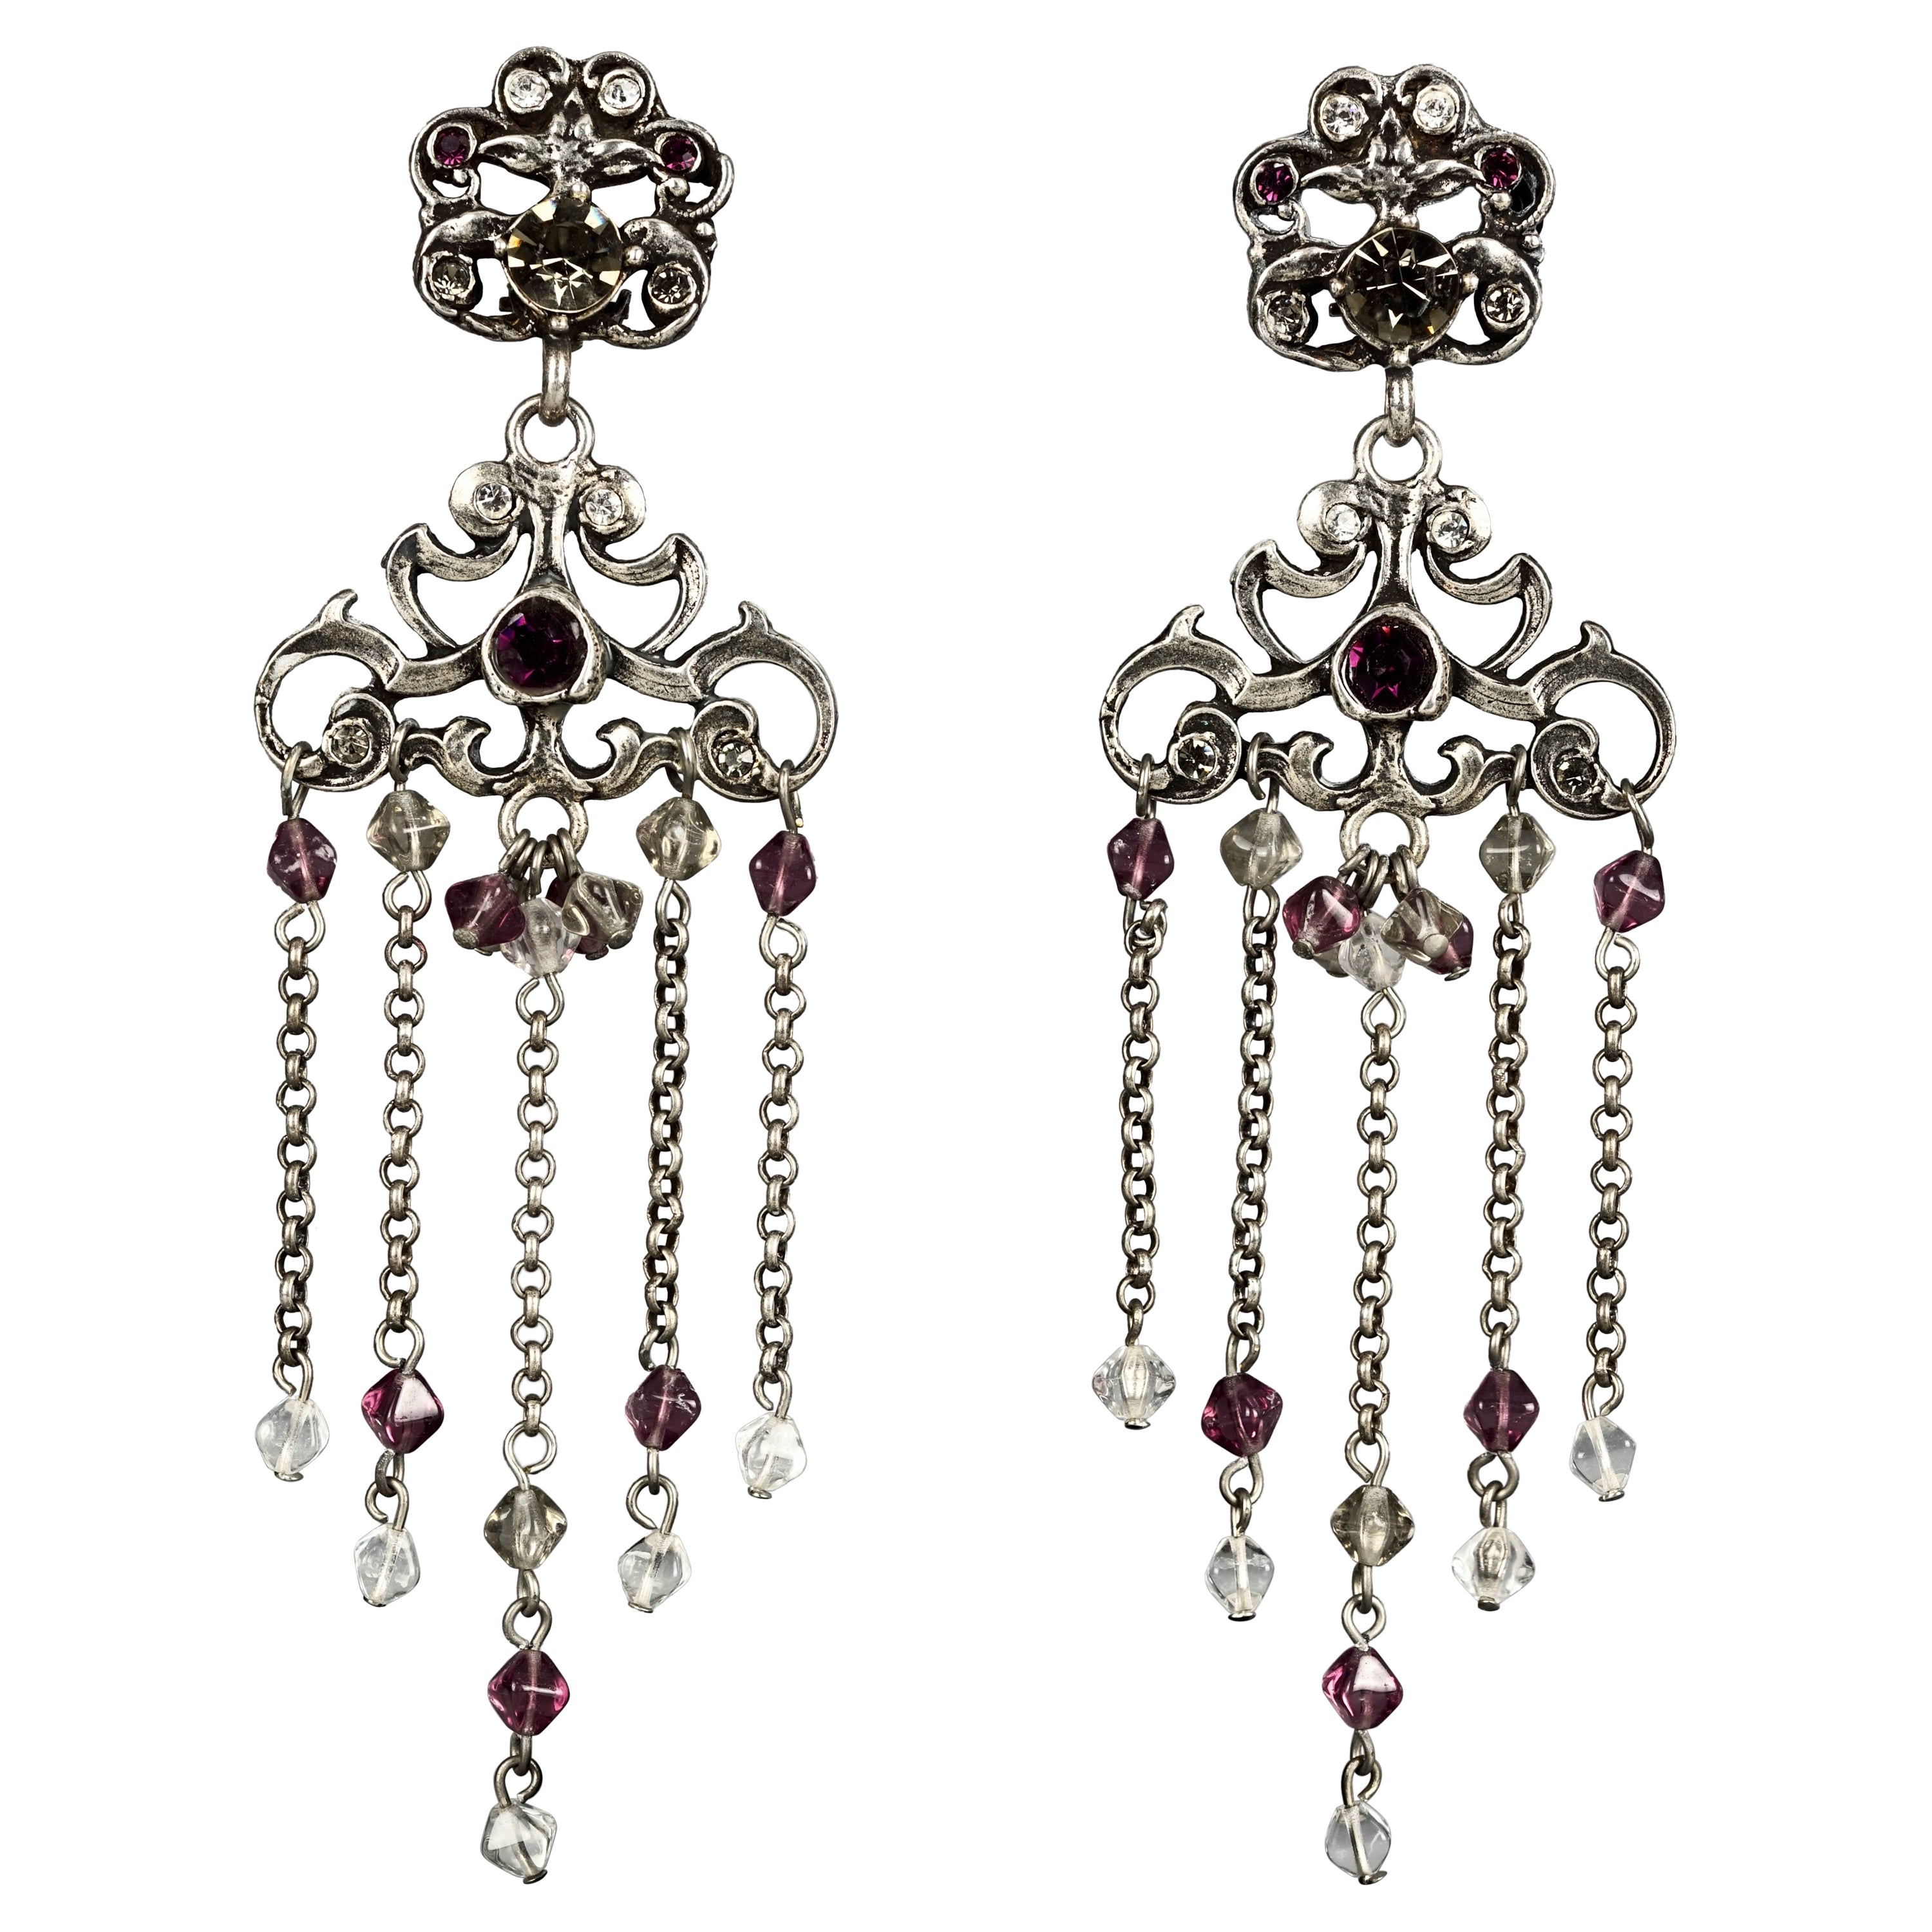 Vintage TON PASCAL Jewelled Baroque Cascading Chain Dangling Earrings For Sale